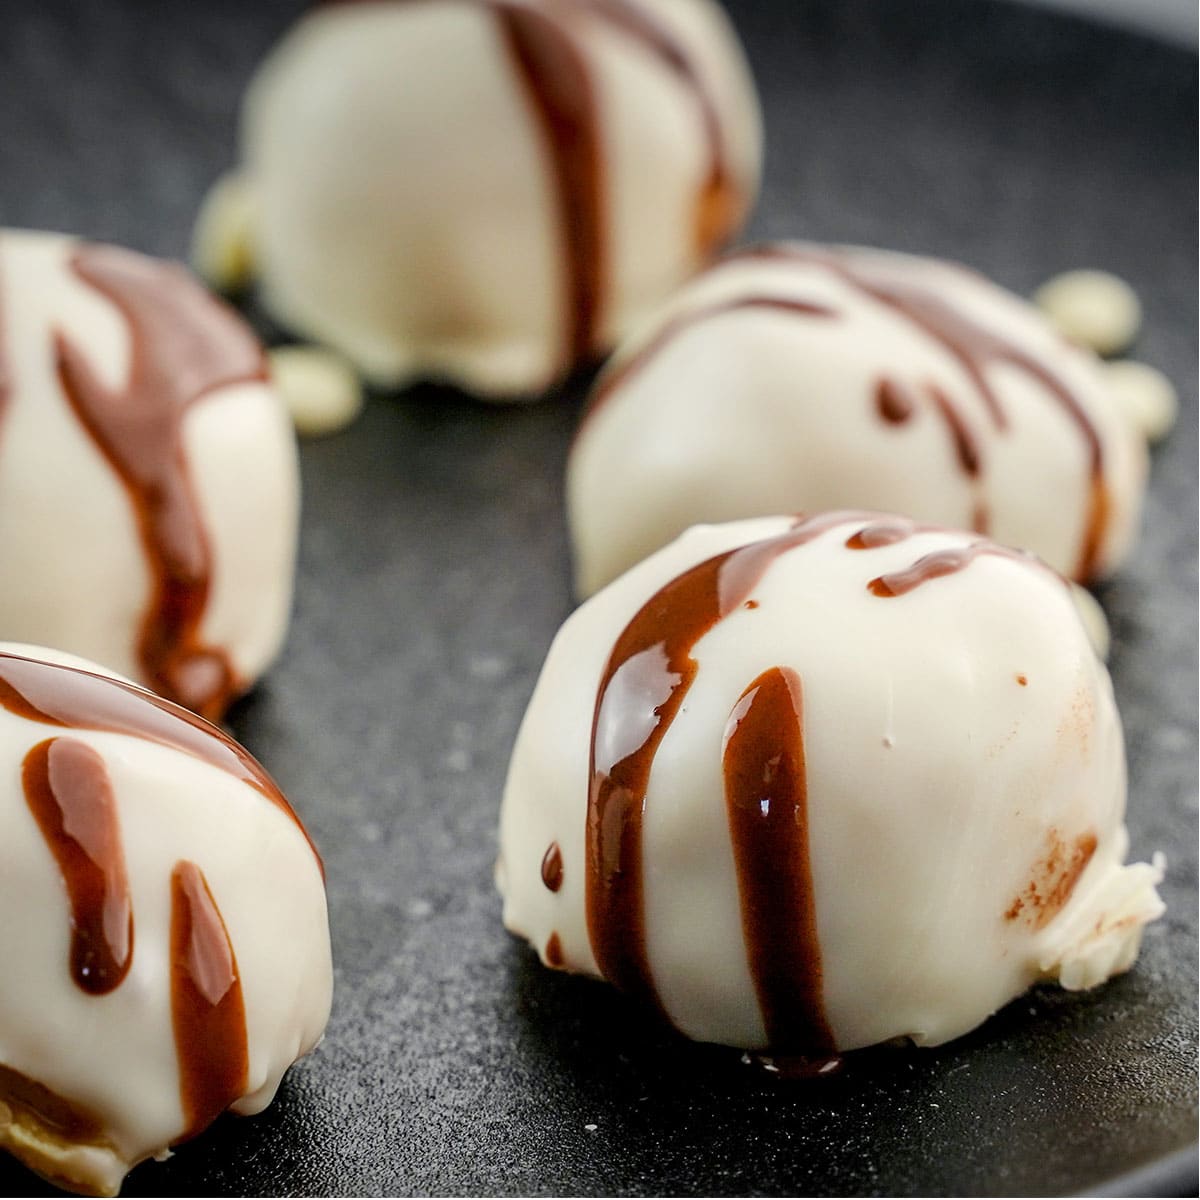 Dive into these White Chocolate Peanut Butter Balls immediately.